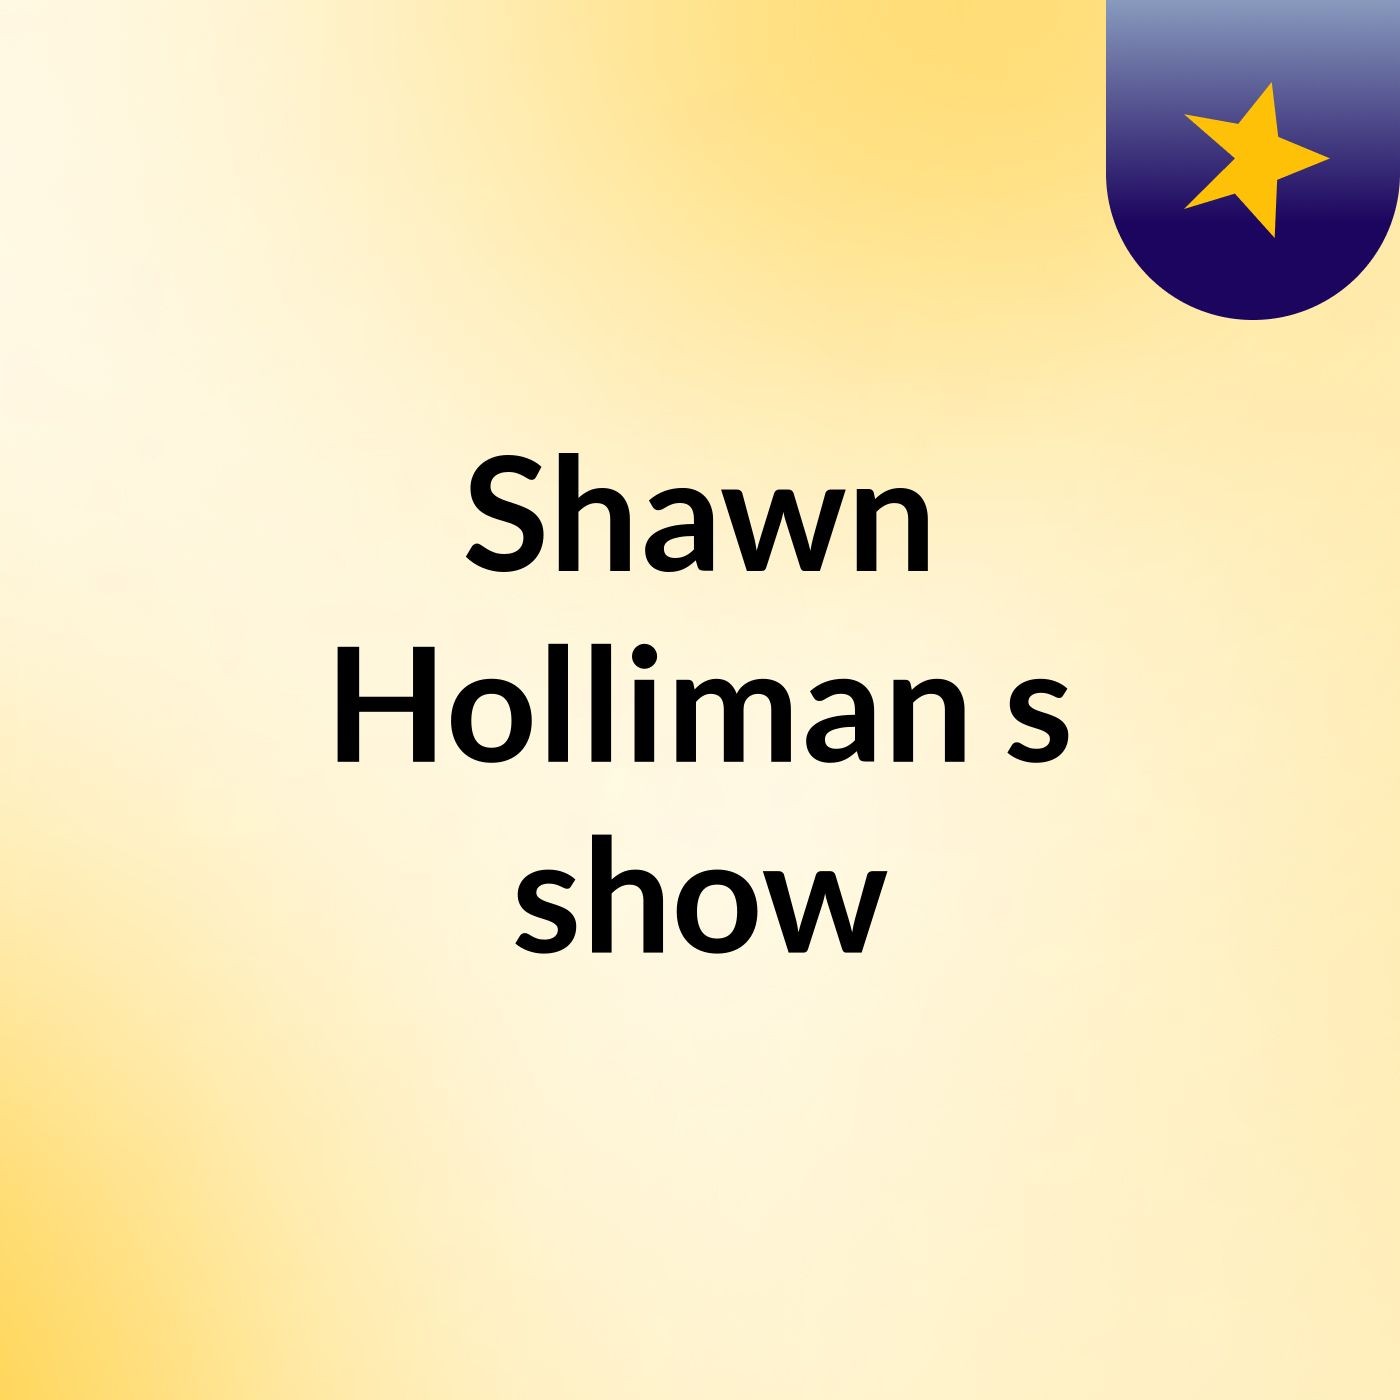 Episode 4 - Shawn Holliman's show